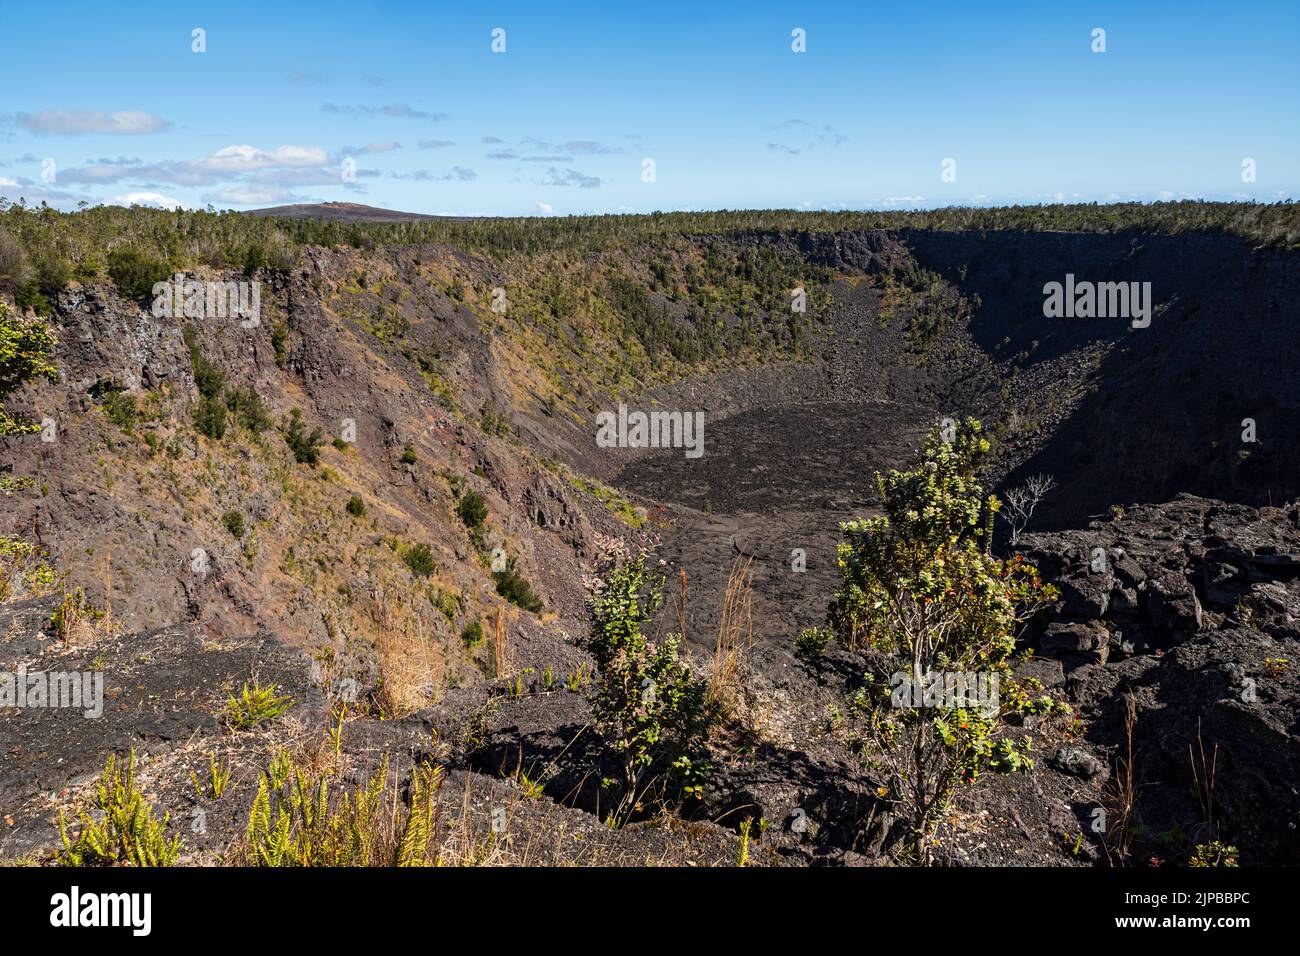 above puhimau crater along chain of craters road in hawaii volcanoes national park Stock Photo